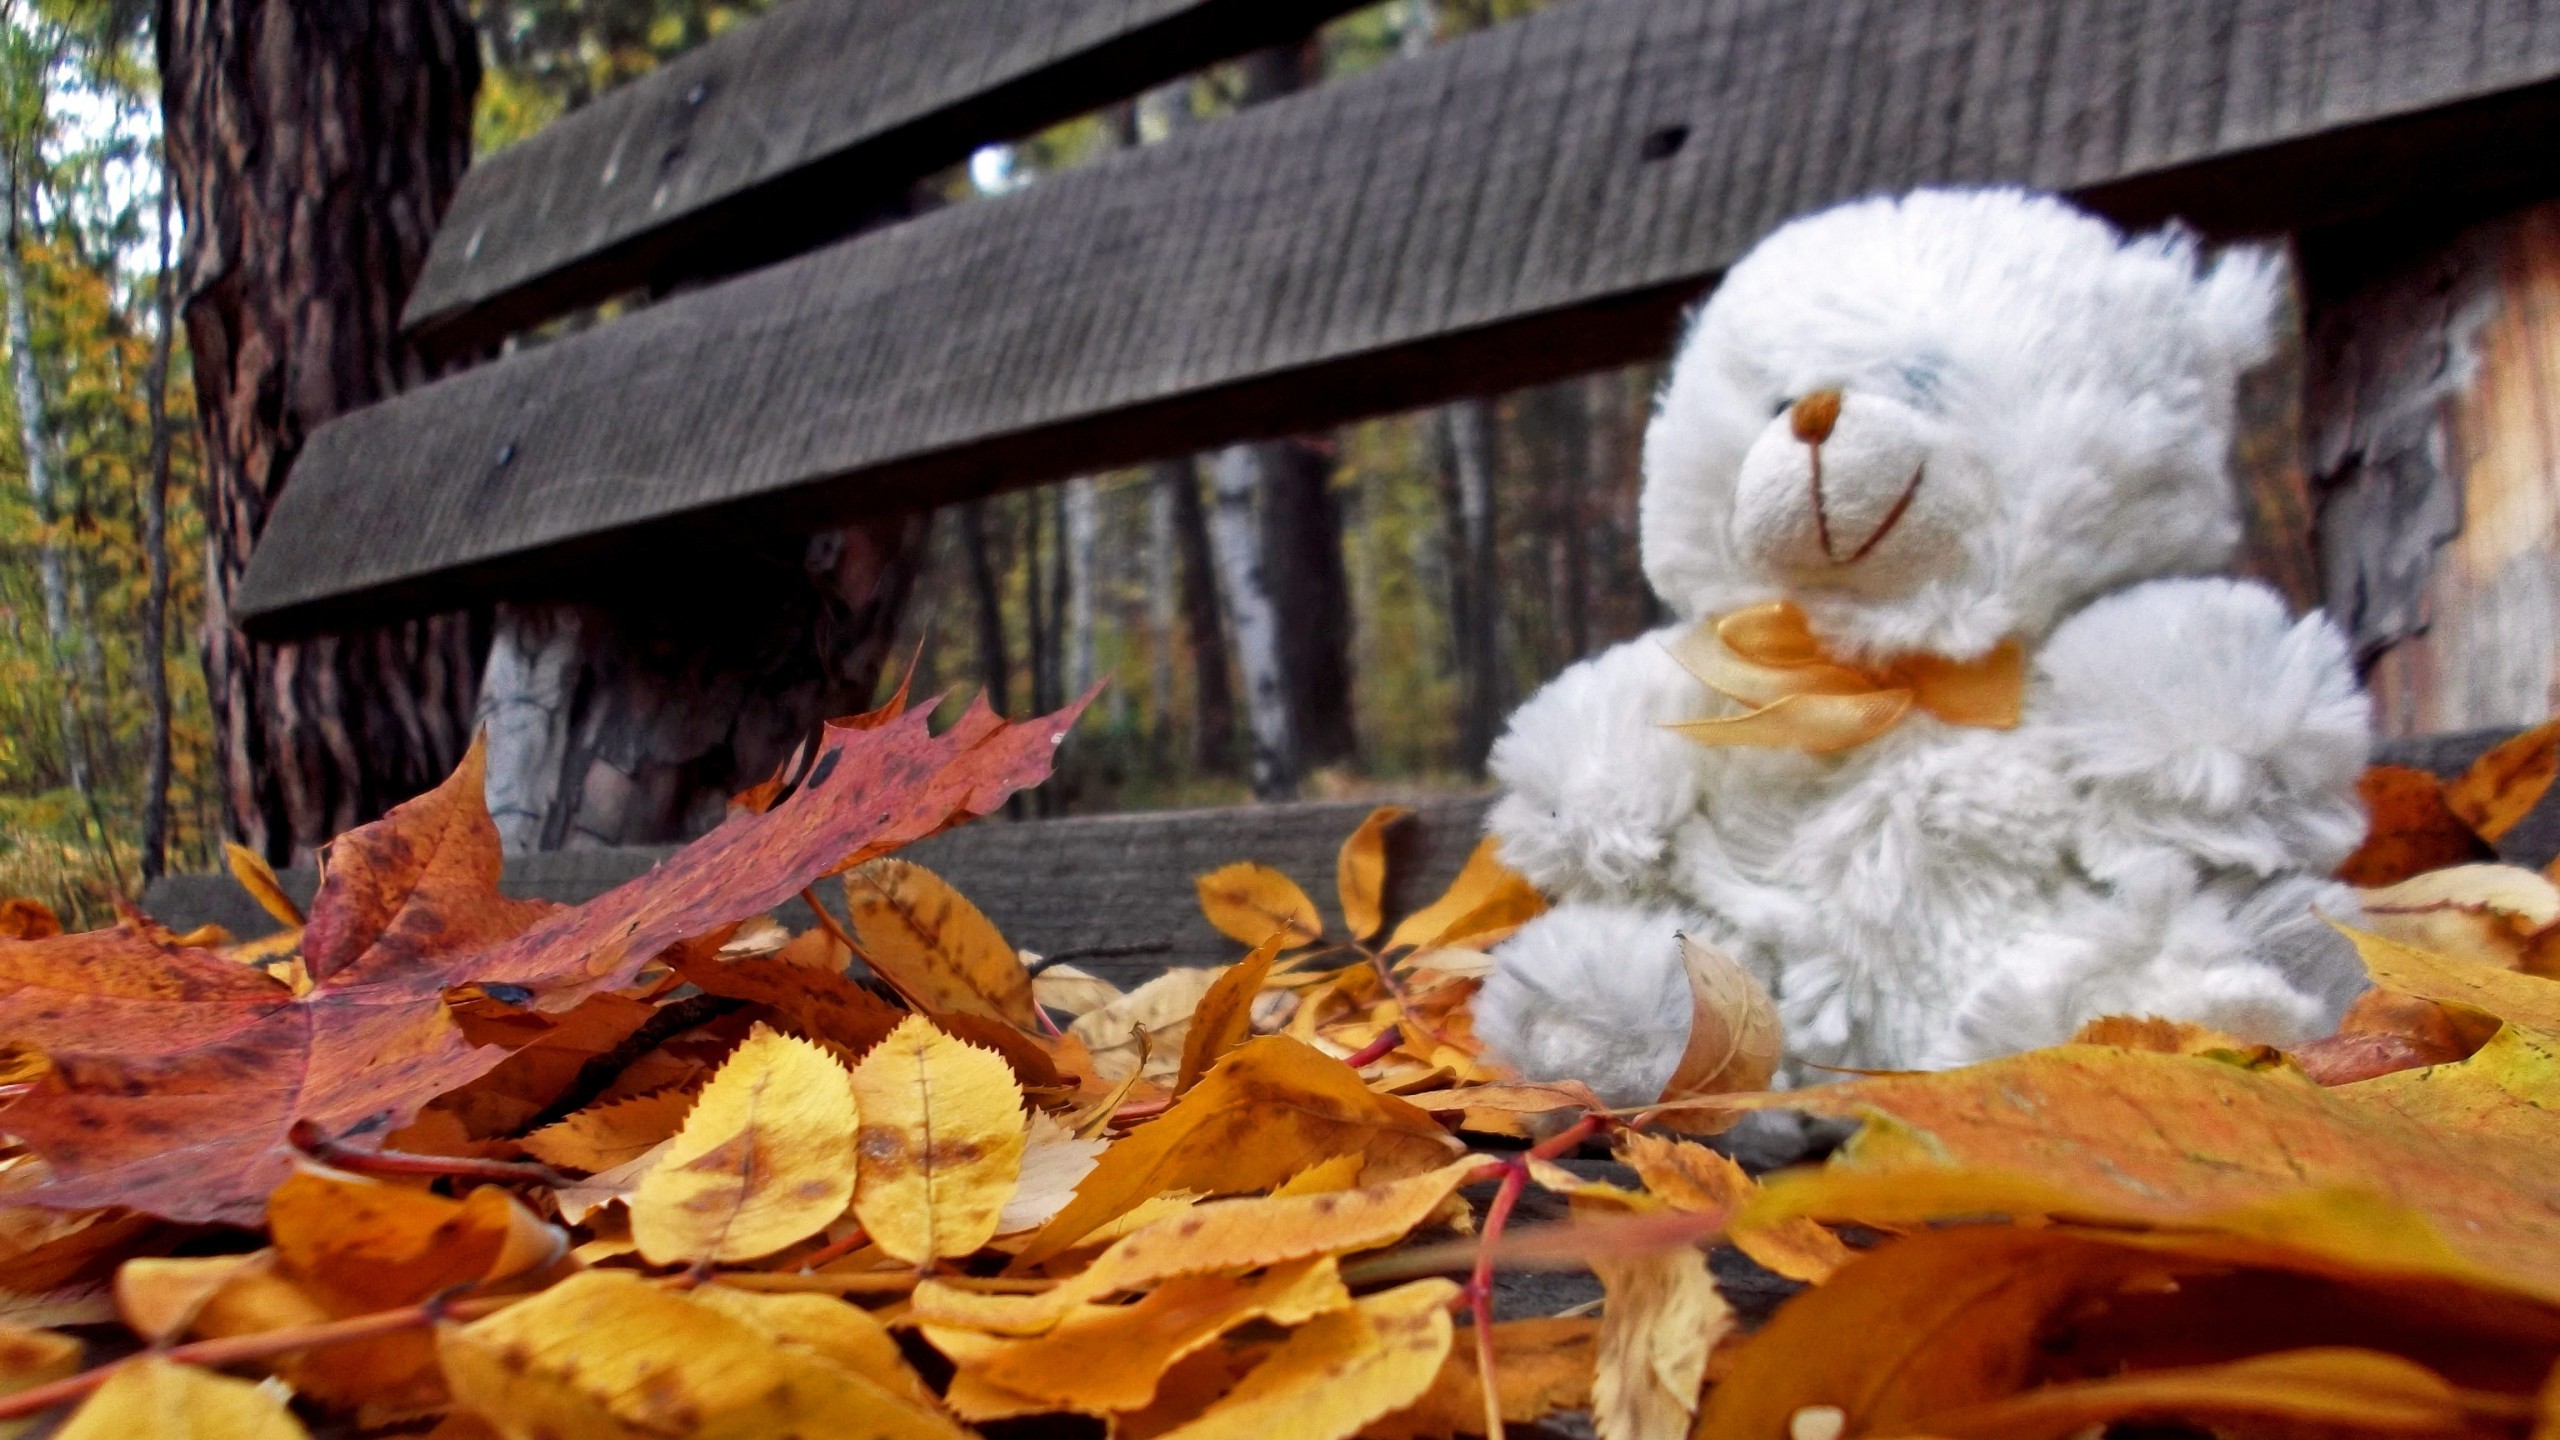 trees, Autumn, Leaves, Bench, Teddy, Bears, Loneliness Wallpaper